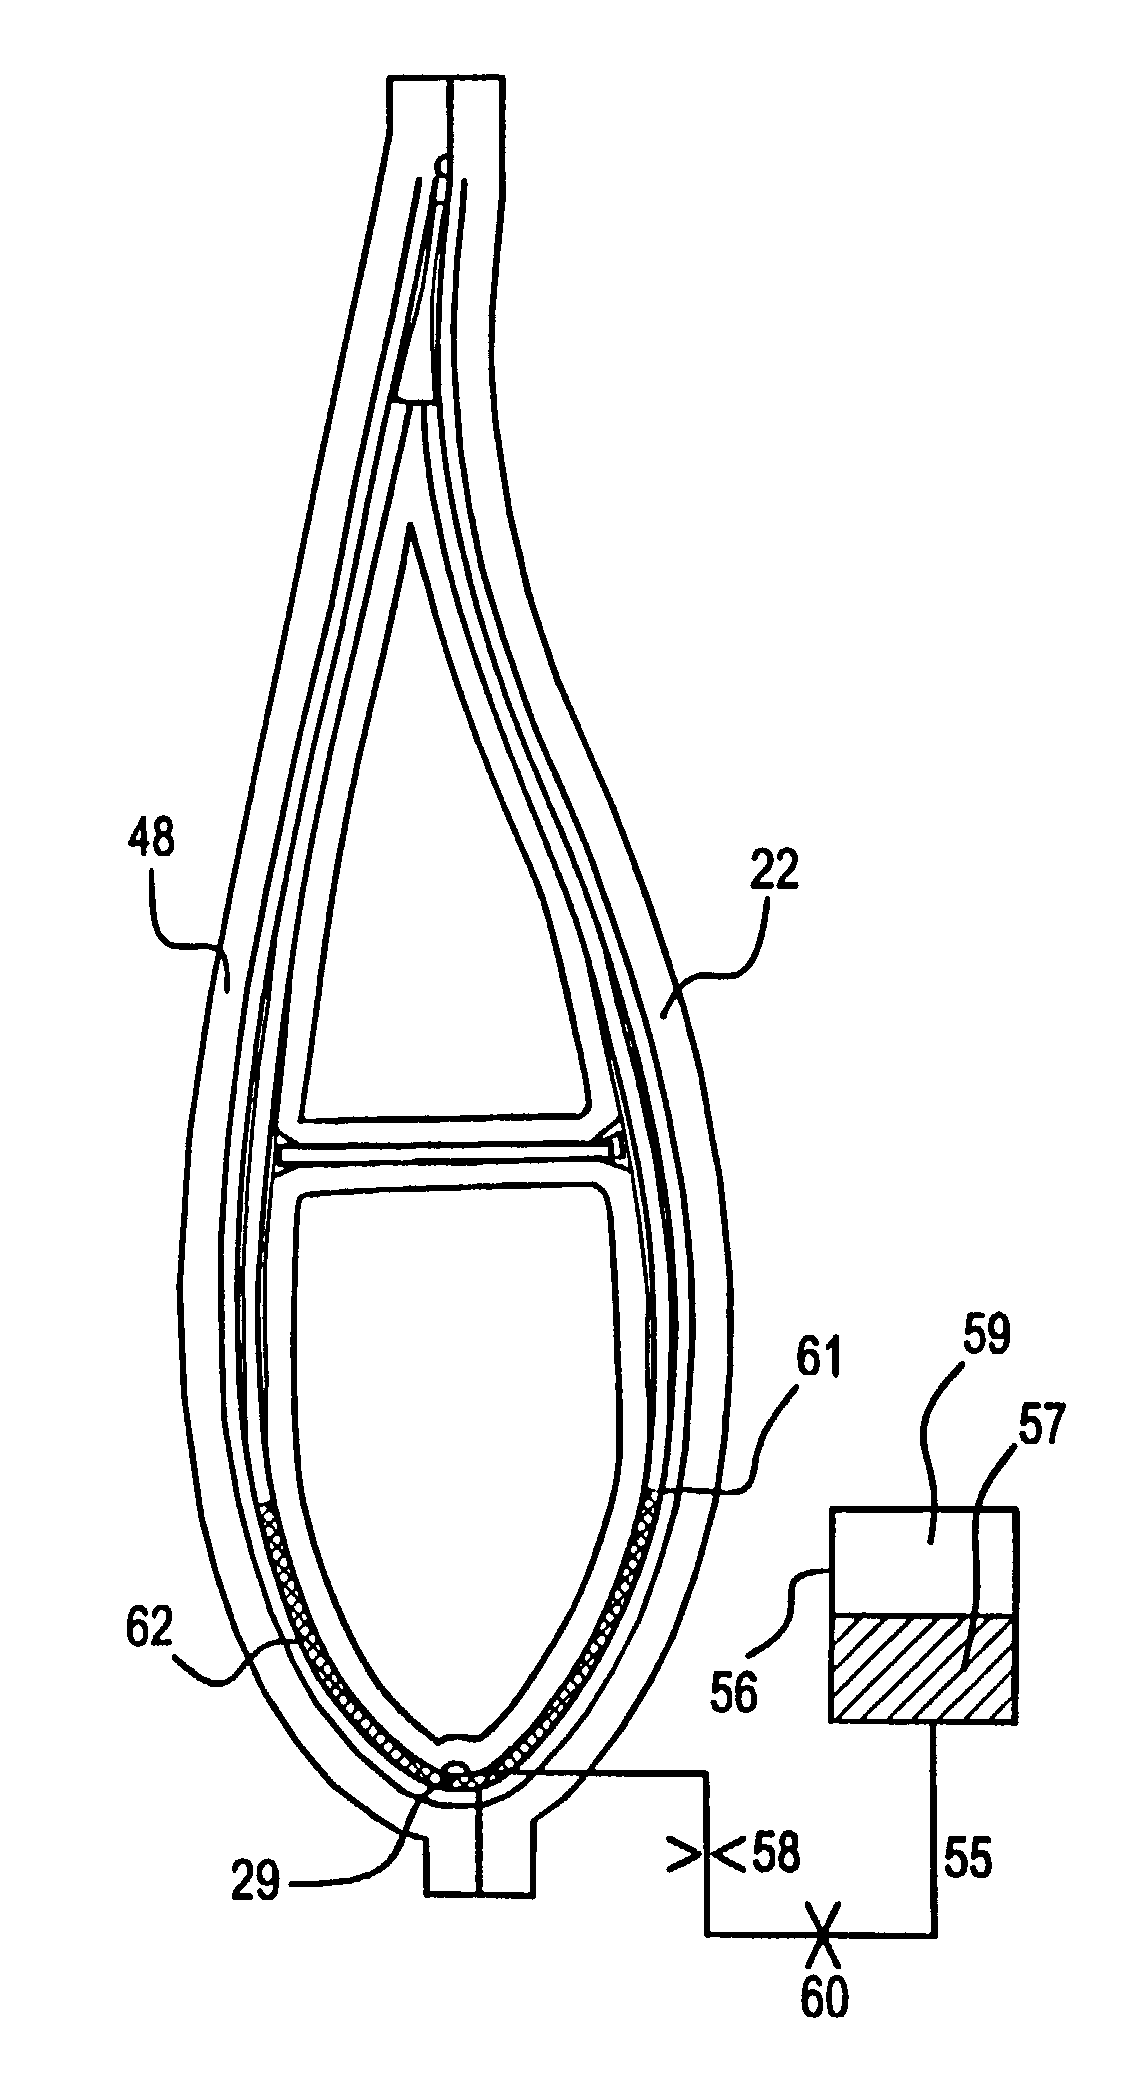 Method for manufacturing windmill blades